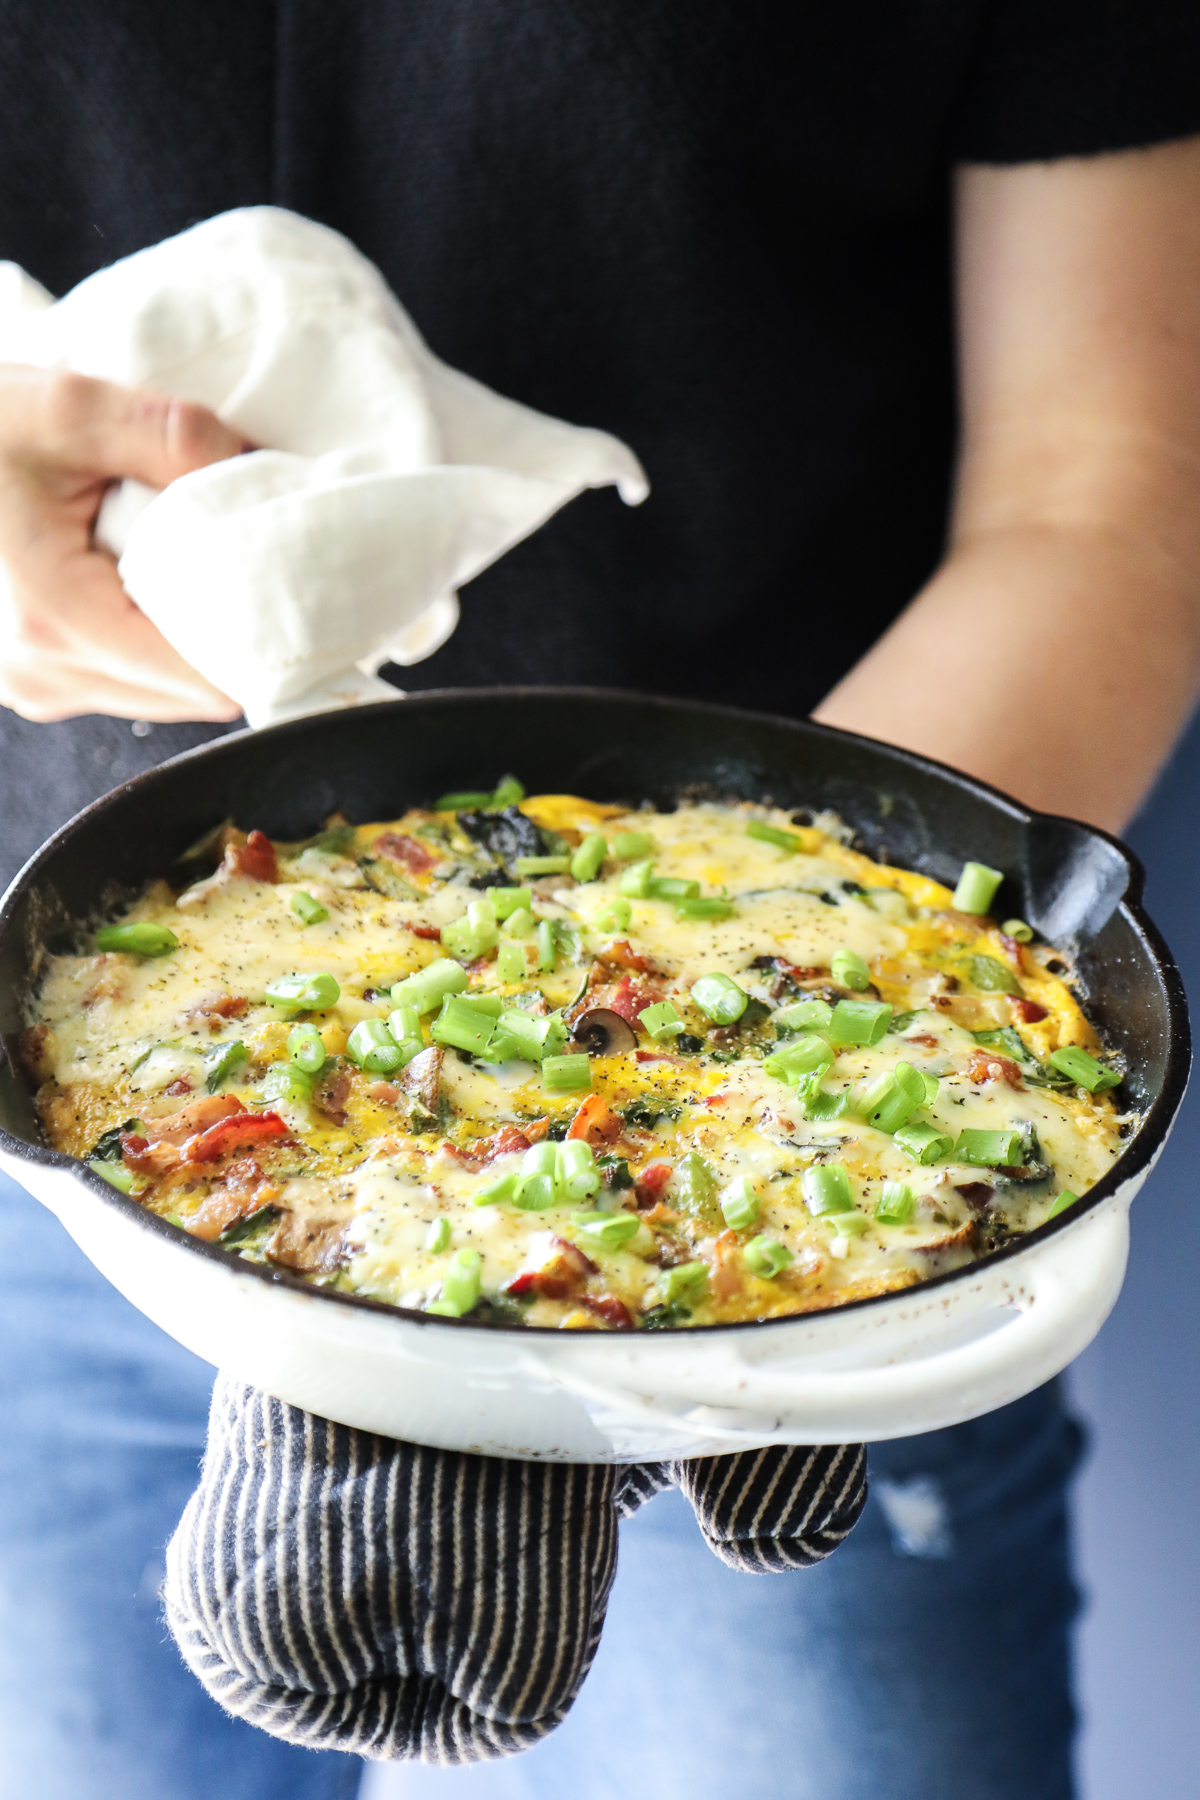 Frittata made with bacon, potatoes, peppers in a cast iron skillet.